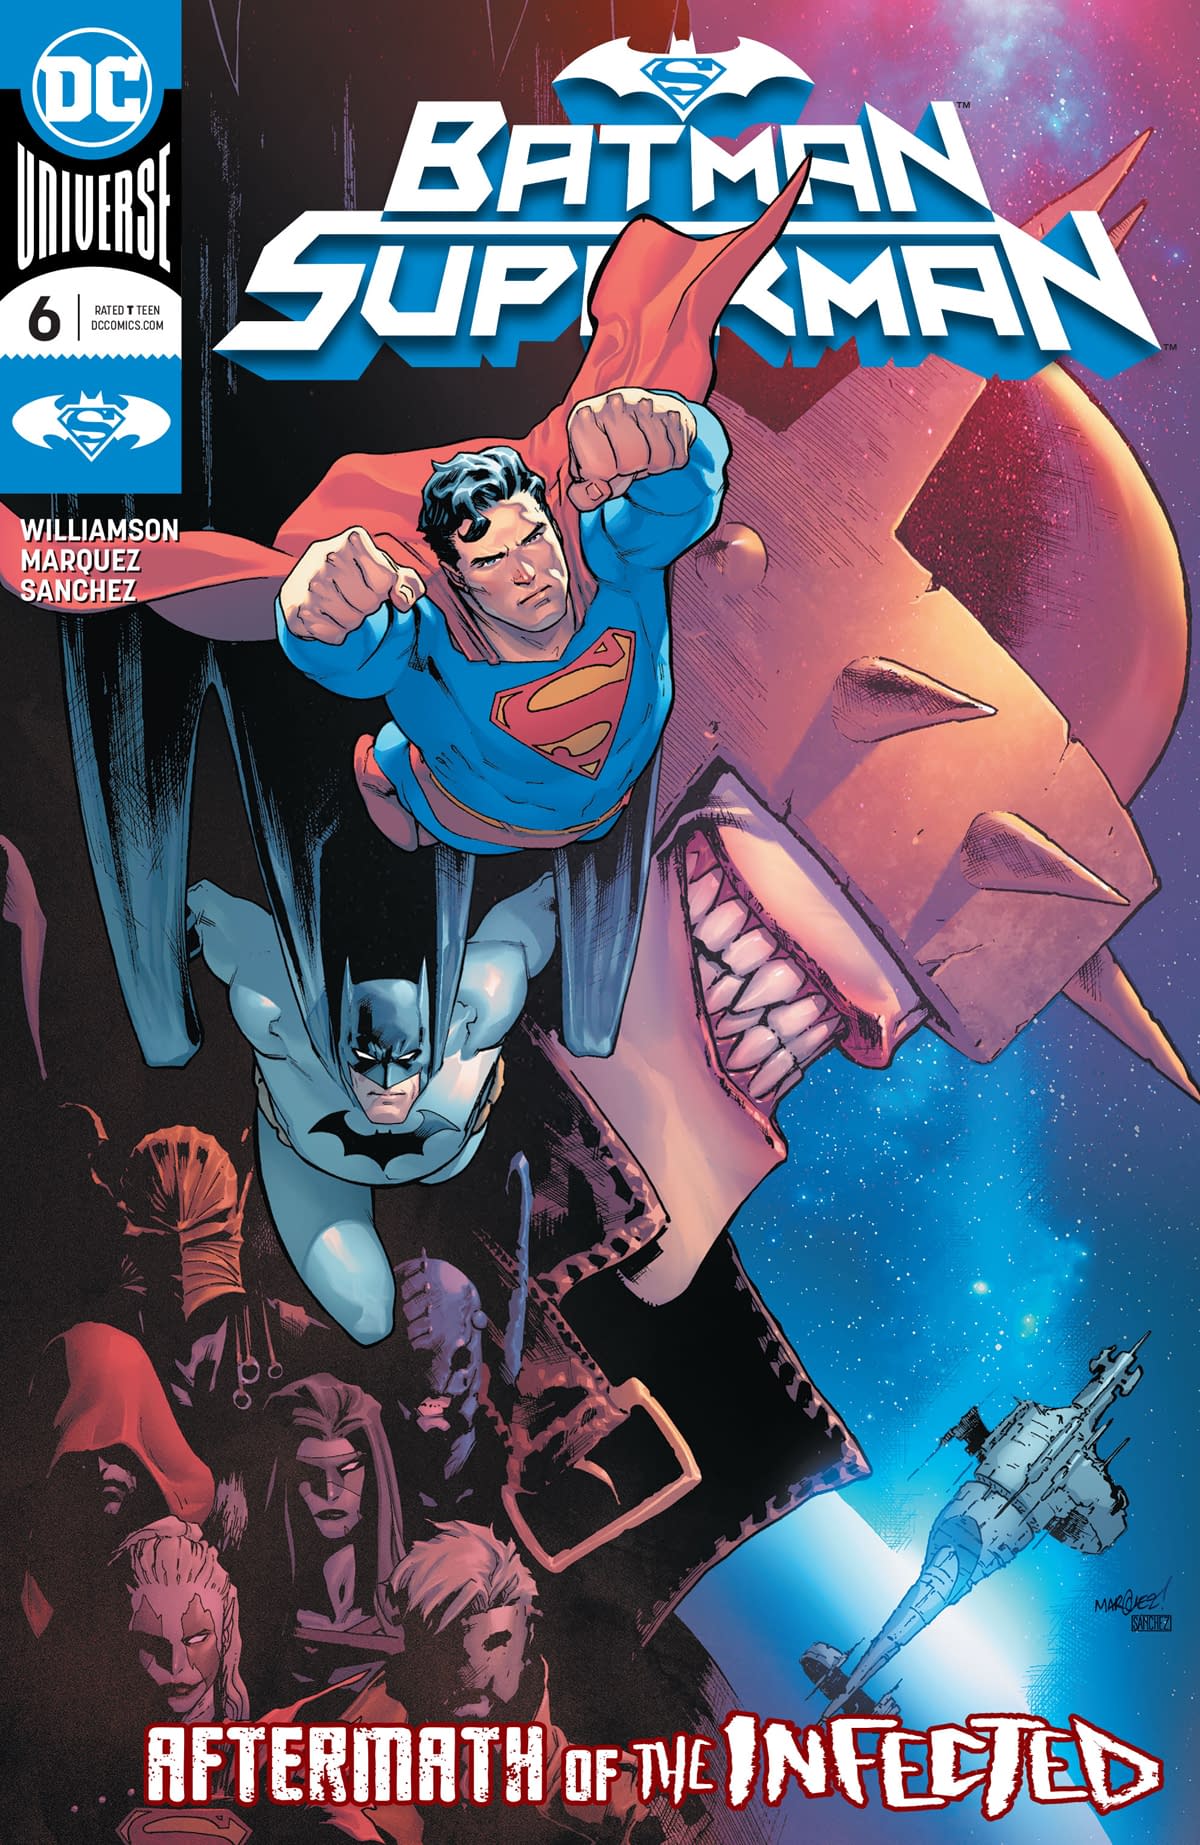 REVIEW: Batman Superman #6 -- "A Gorgeous Symphony Of Superhero Imagery With Nothing Underneath"